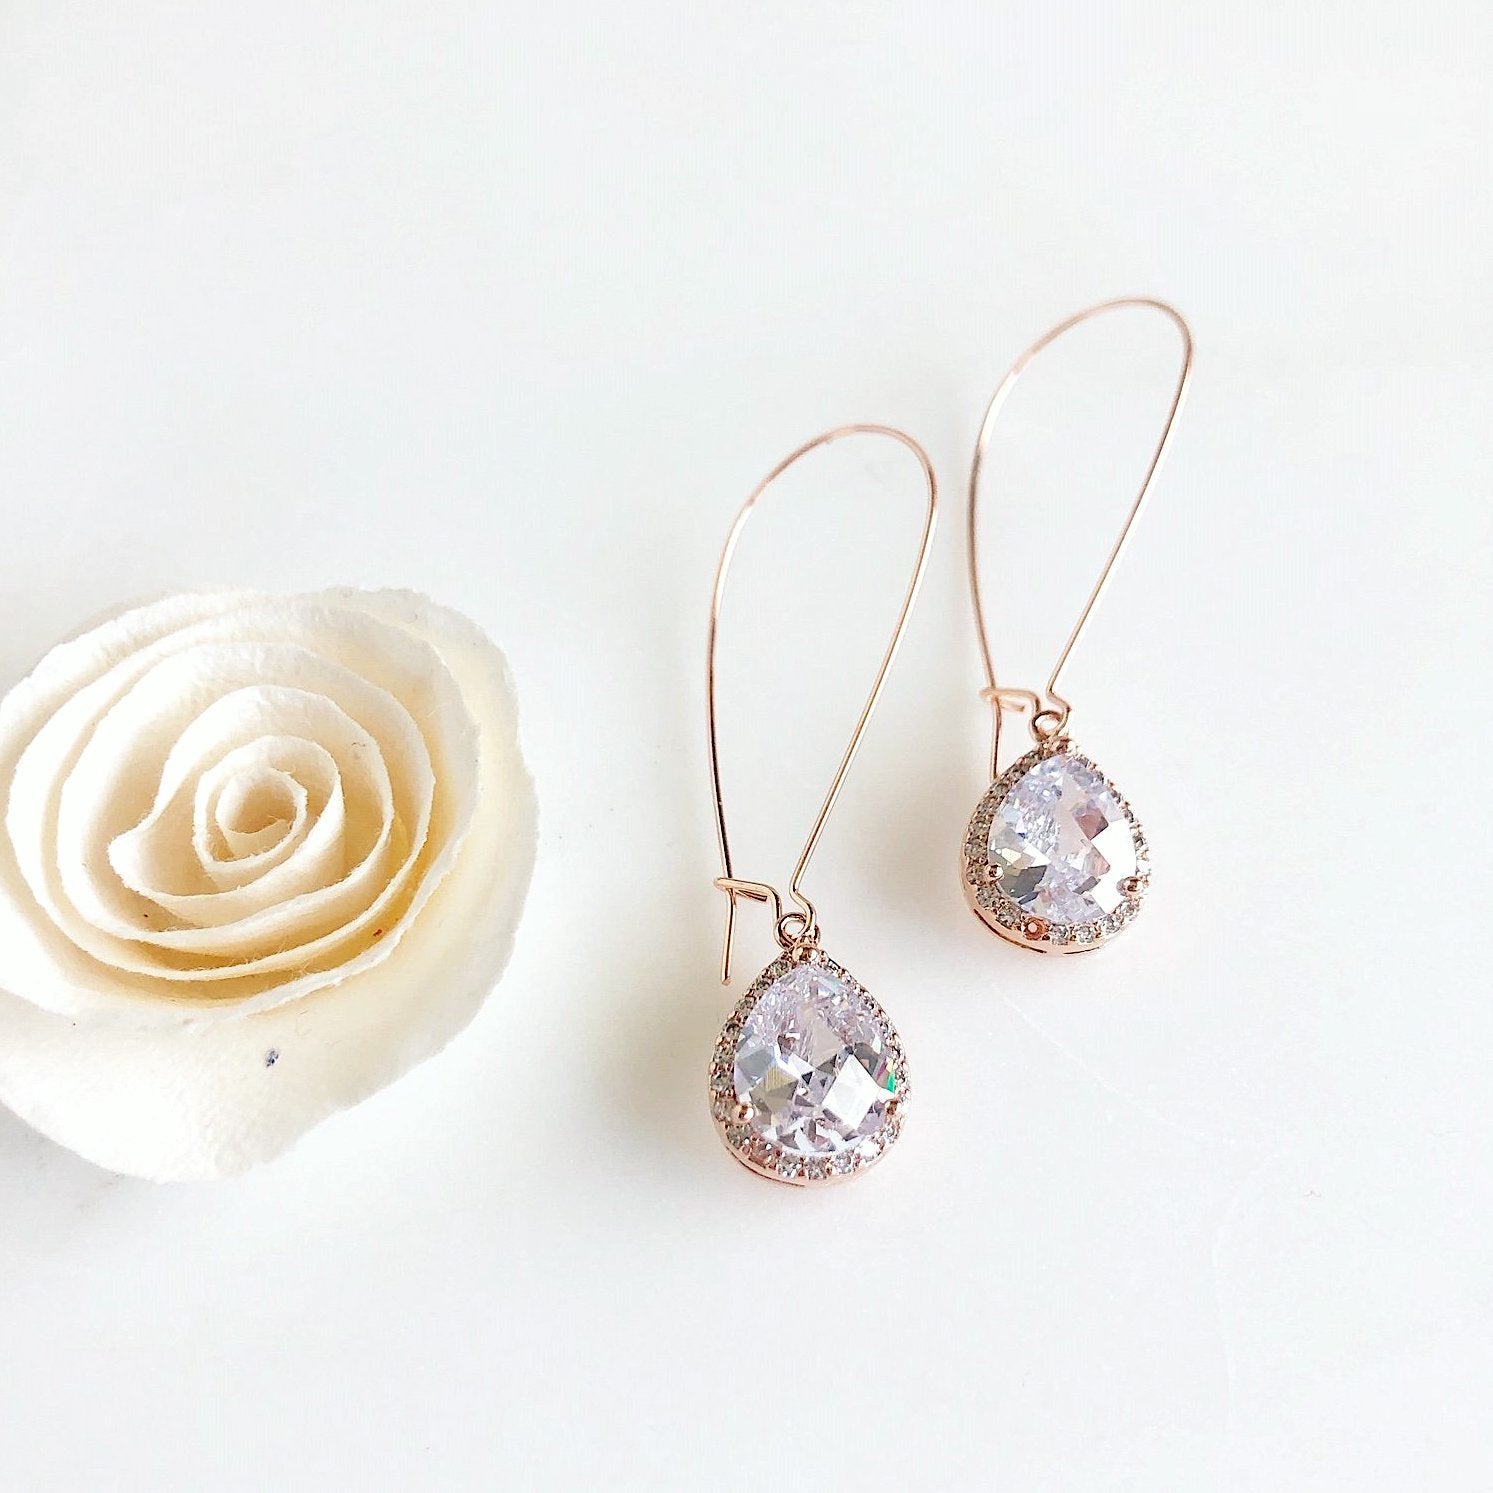 Round Cut Solitaire Drop Earrings